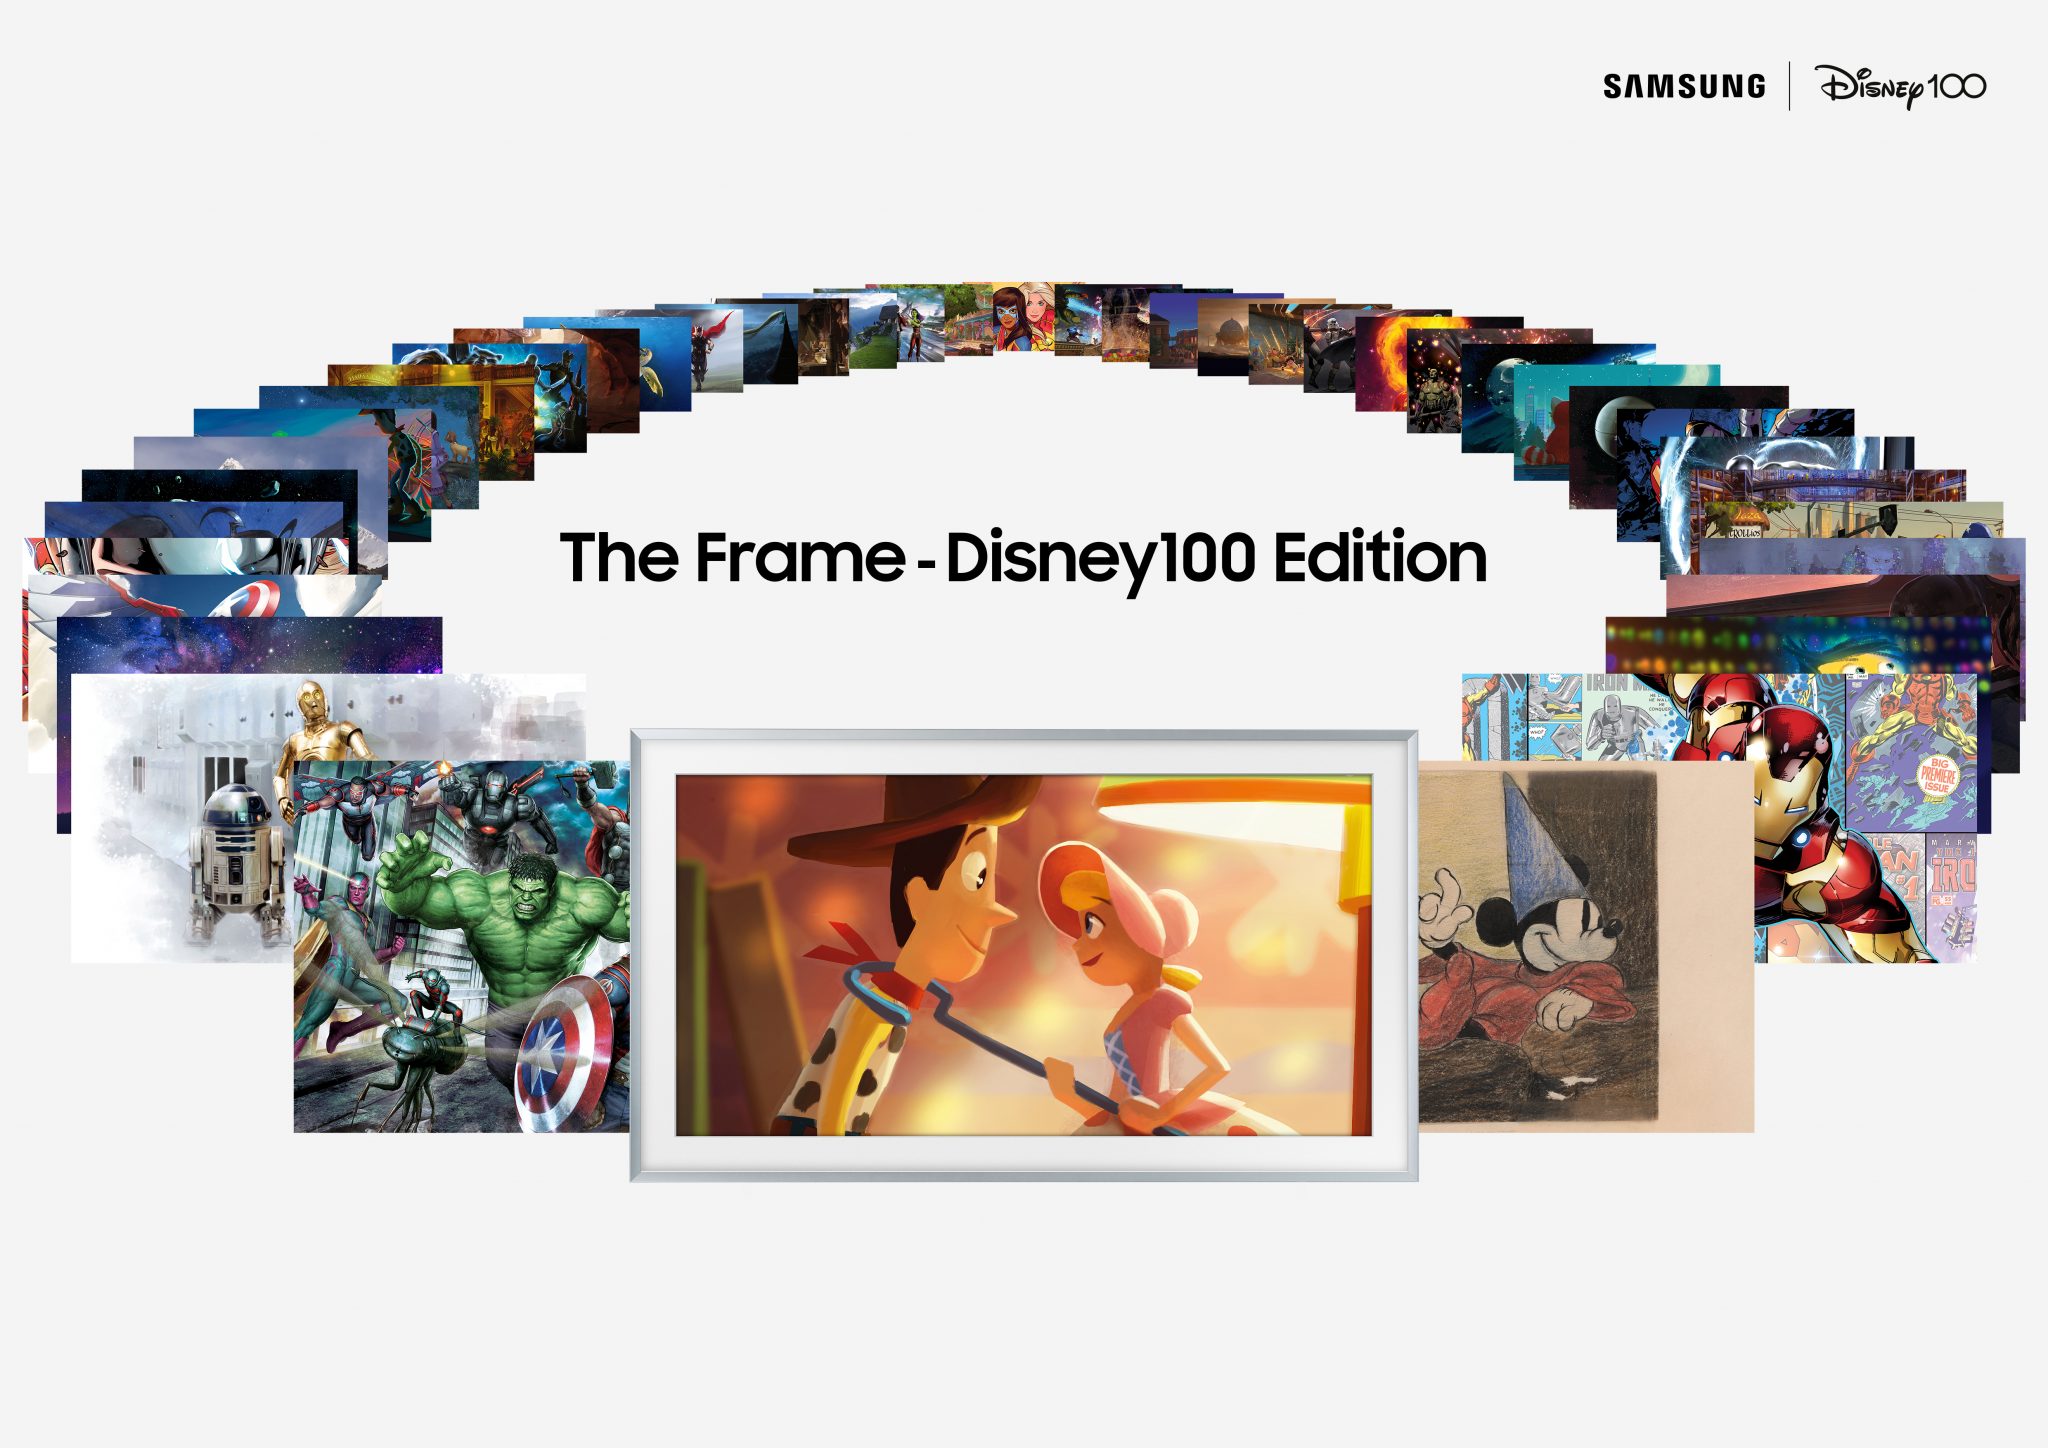 Samsung has brought back The Frame TV Disney 100 Edition TVs with 55, 65 and 75-inch screen sizes